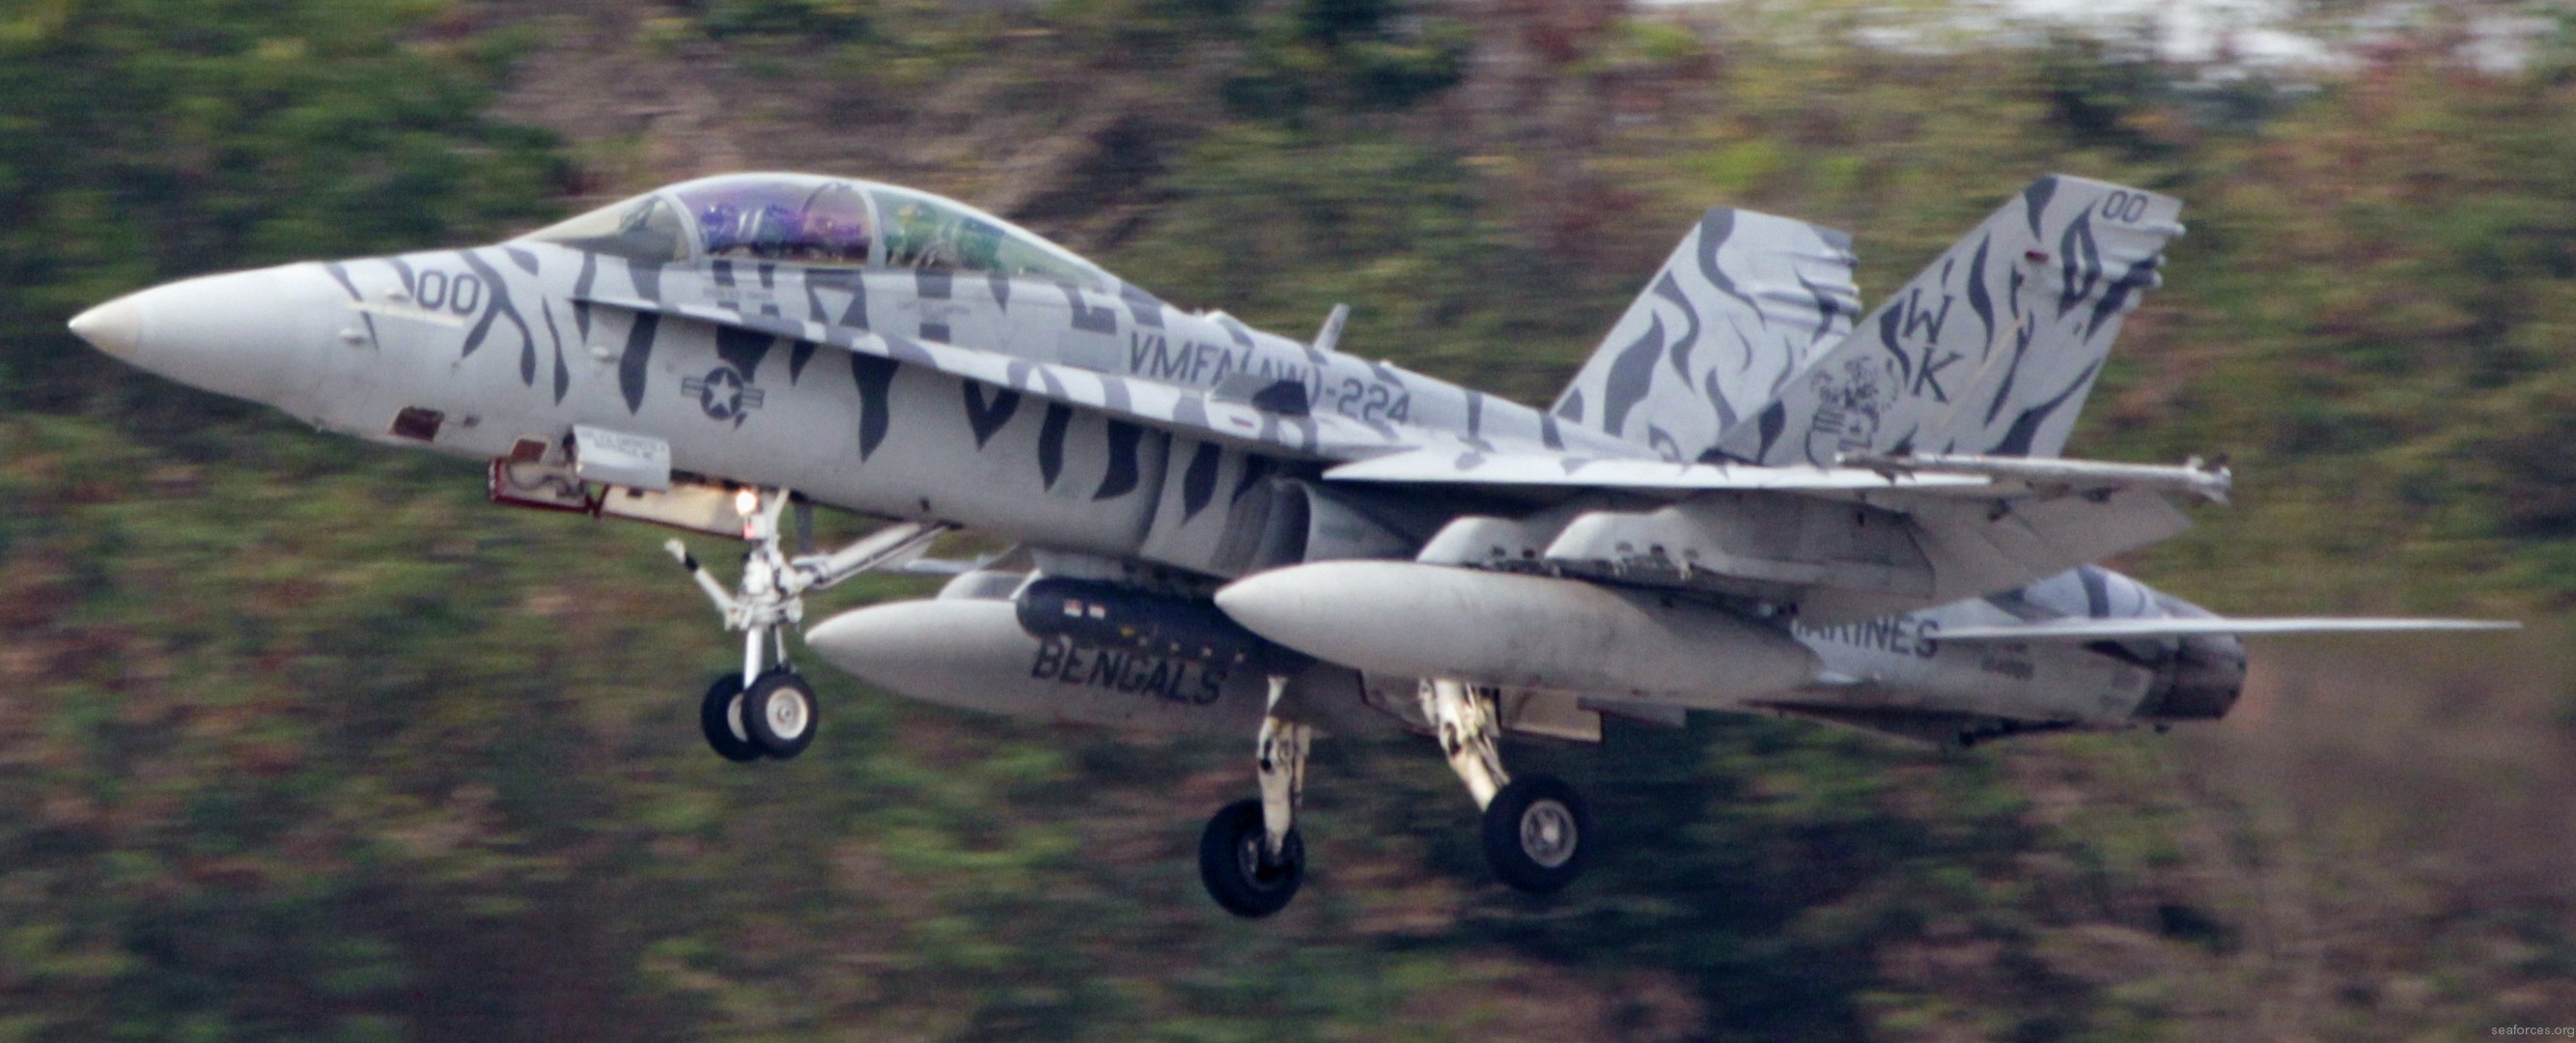 vmfa(aw)-224 bengals marine fighter attack squadron usmc f/a-18d hornet 11 exercise cobra gold thailand